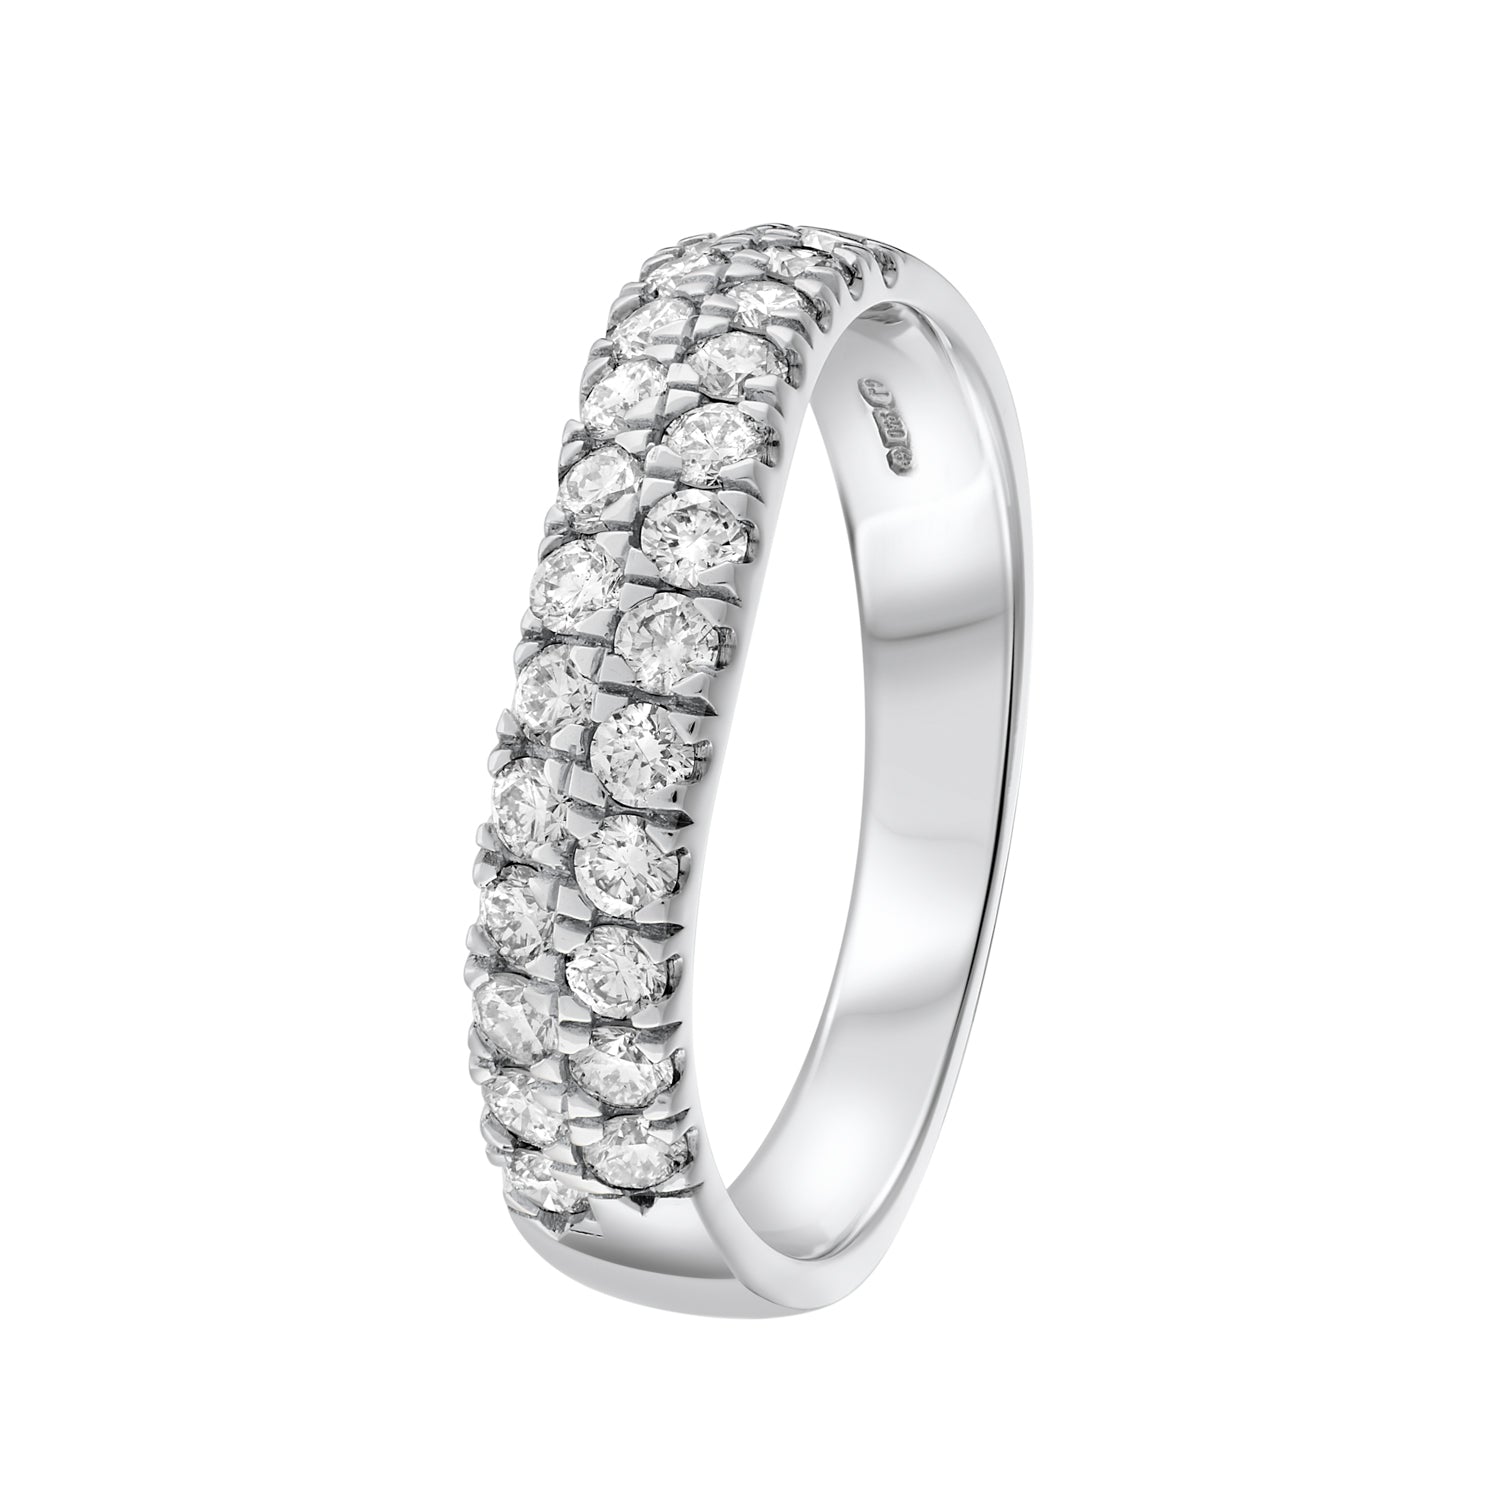 Curved Diamond Ring With Double Row of Diamonds. 0.87ct